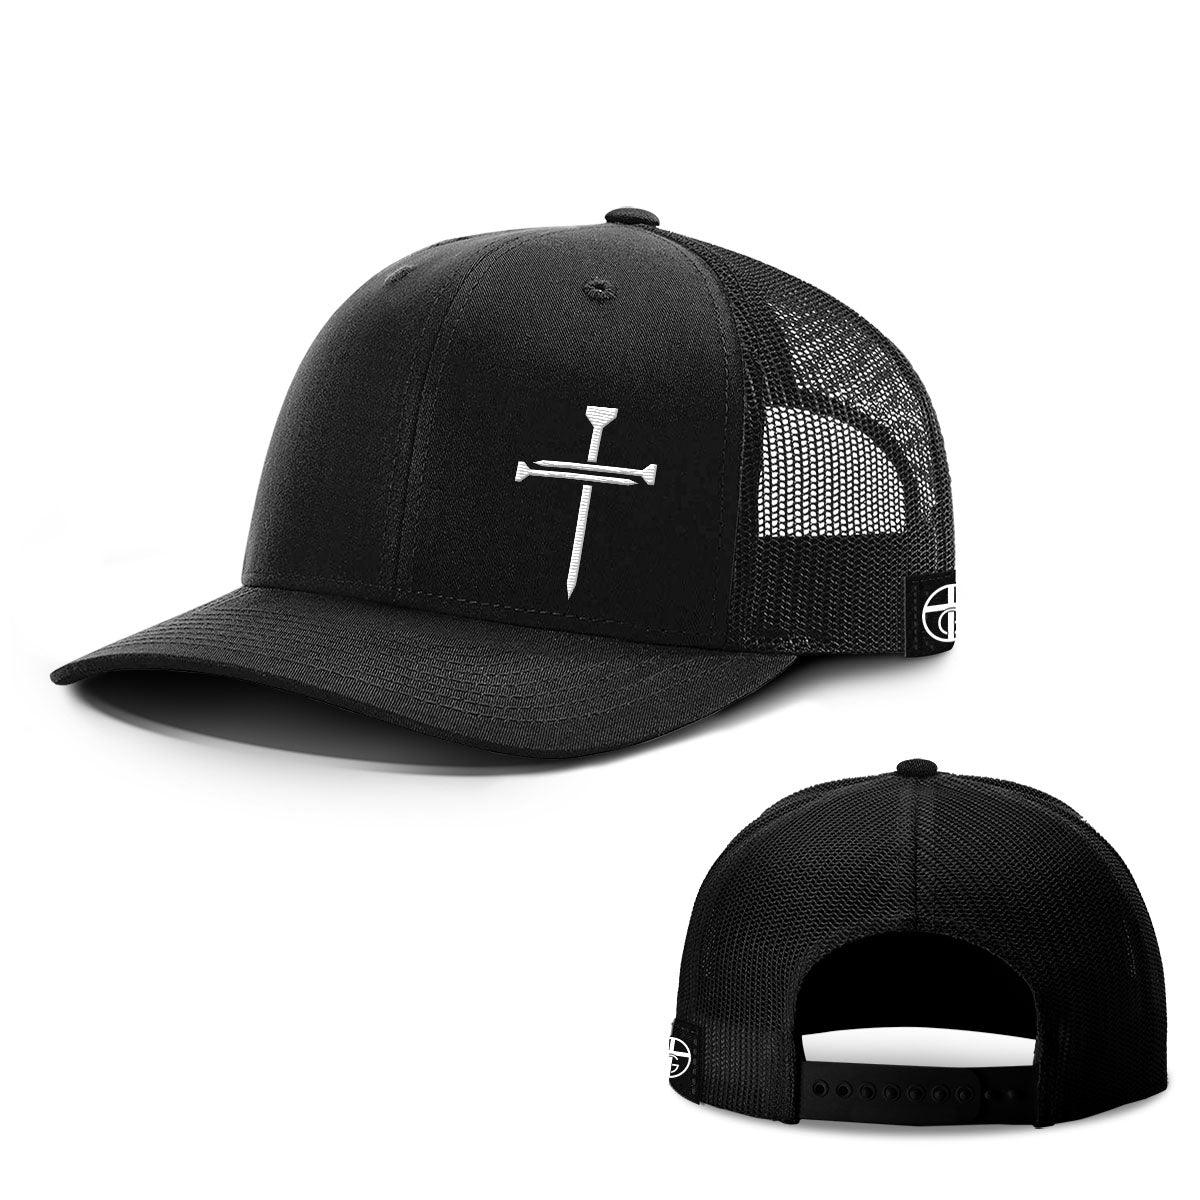 Nail Cross Lower Left Hats - Our True God